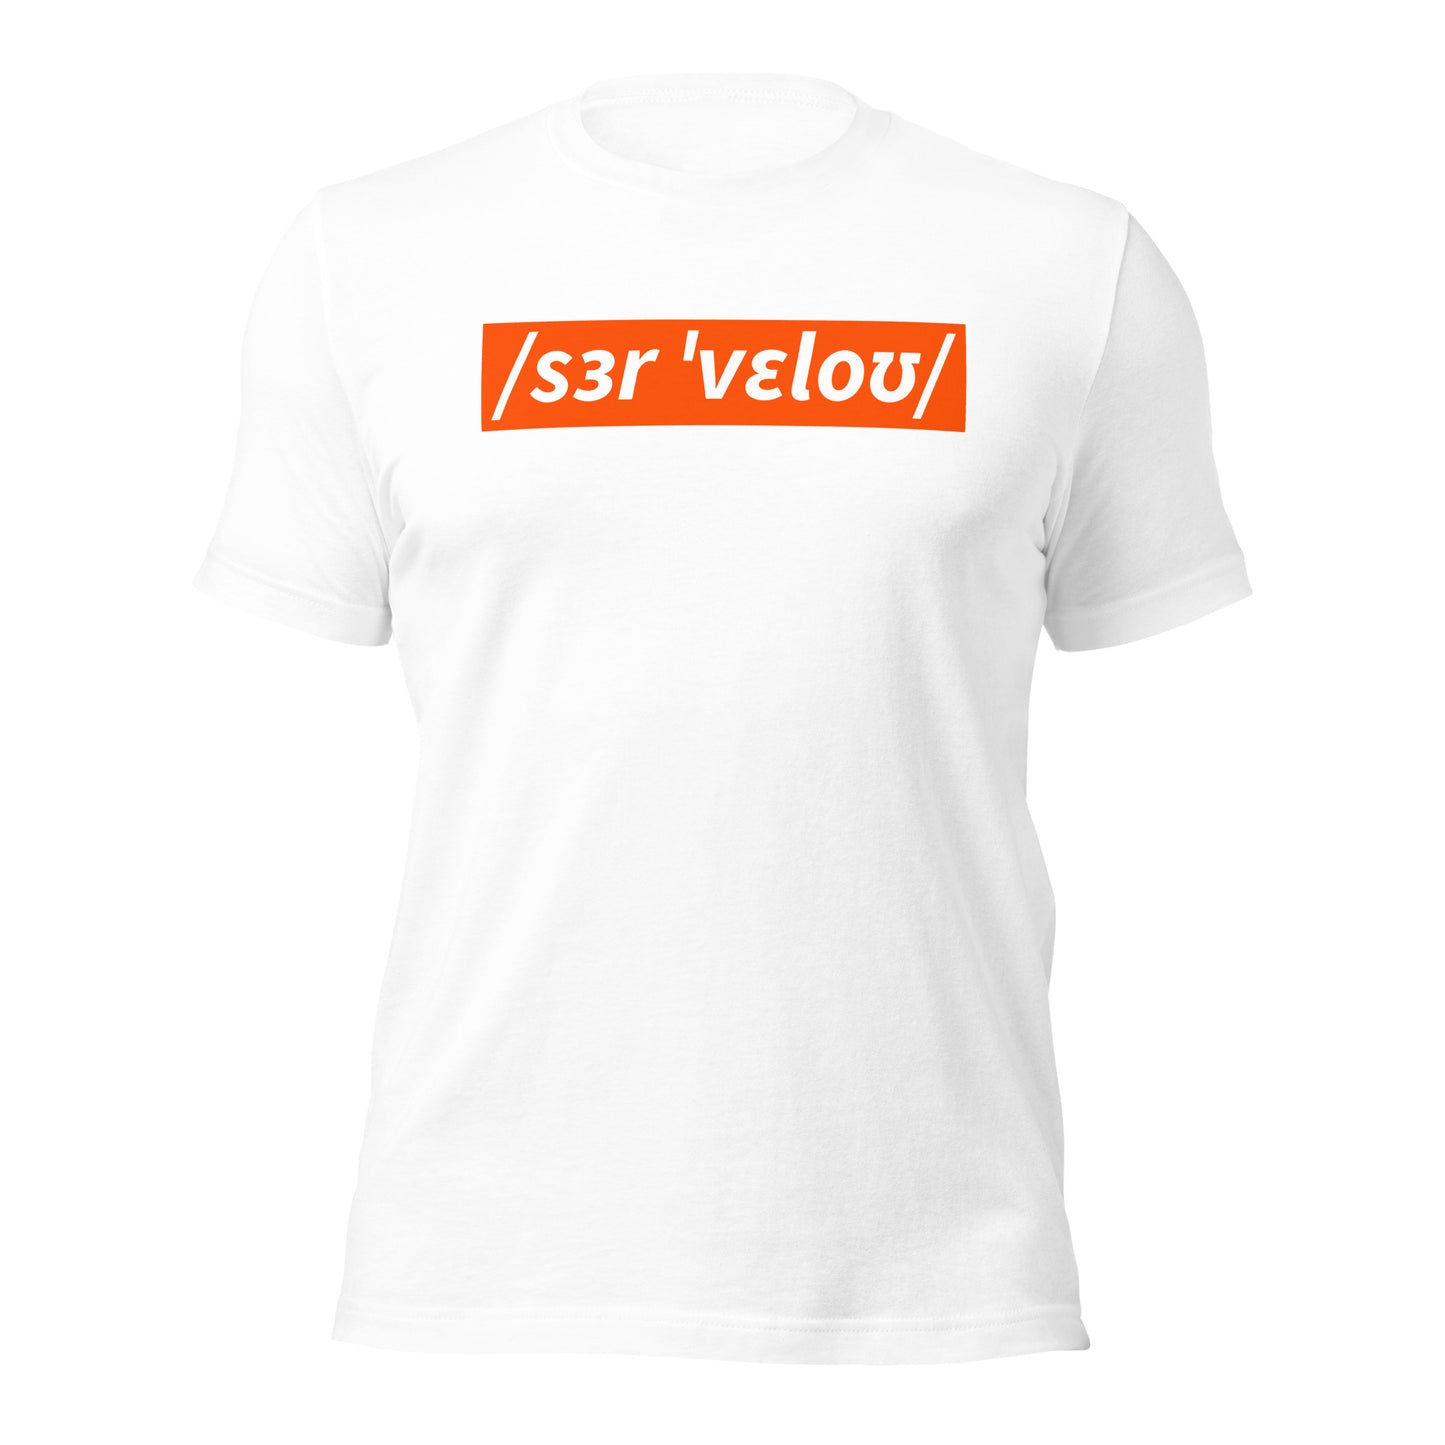 Sir Velo Bicycle T-Shirt, Adult Cyclist, Phonetic Spelling